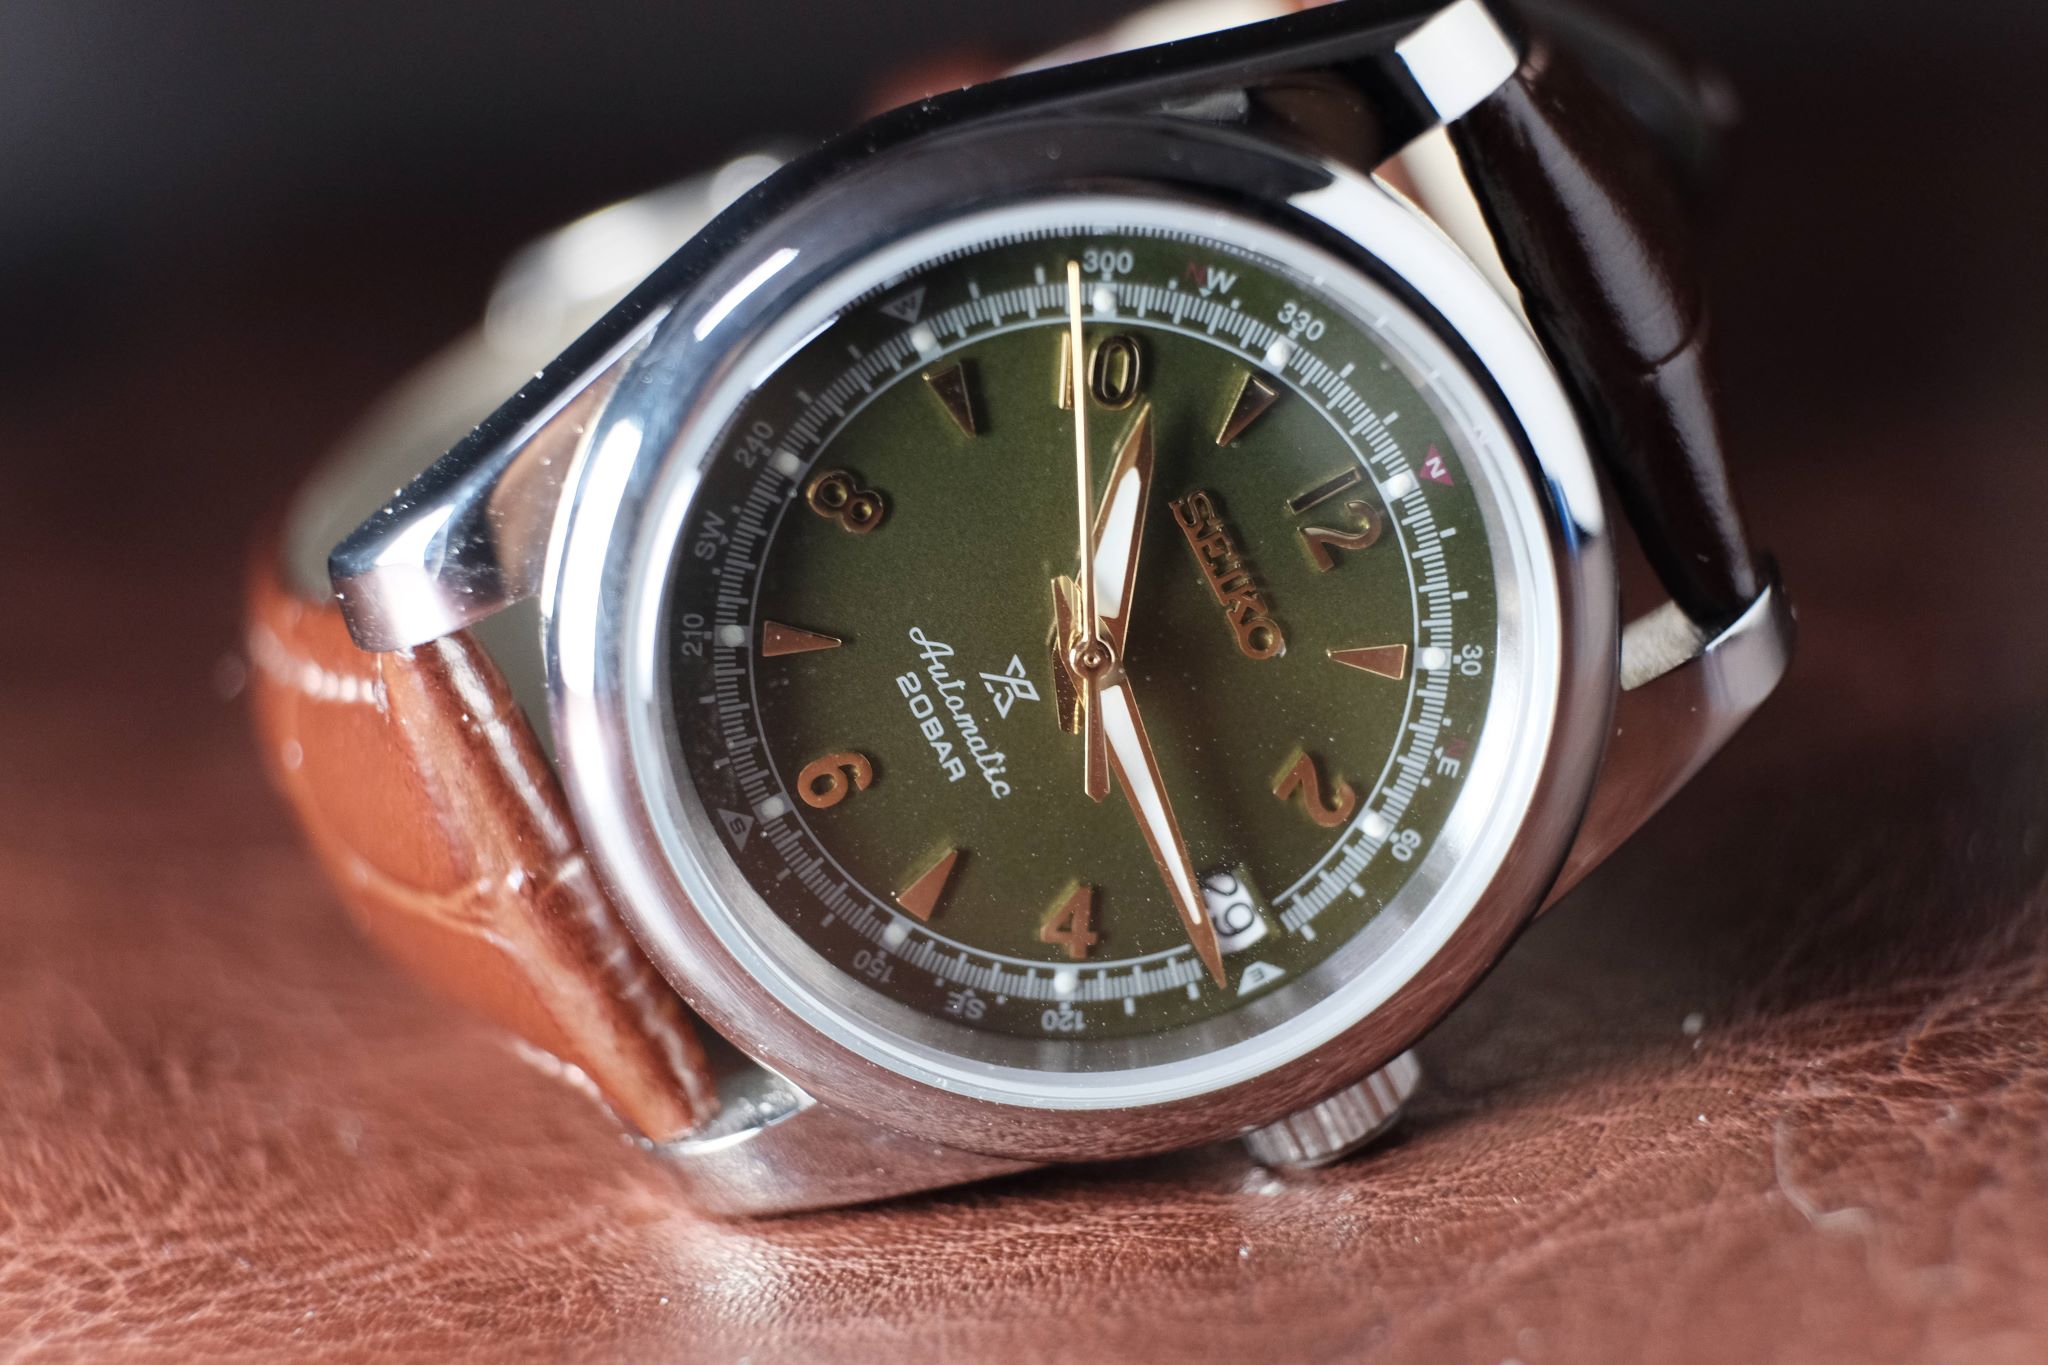 Olive alpinist dial in Oyster Perpetual case and questional hand choices